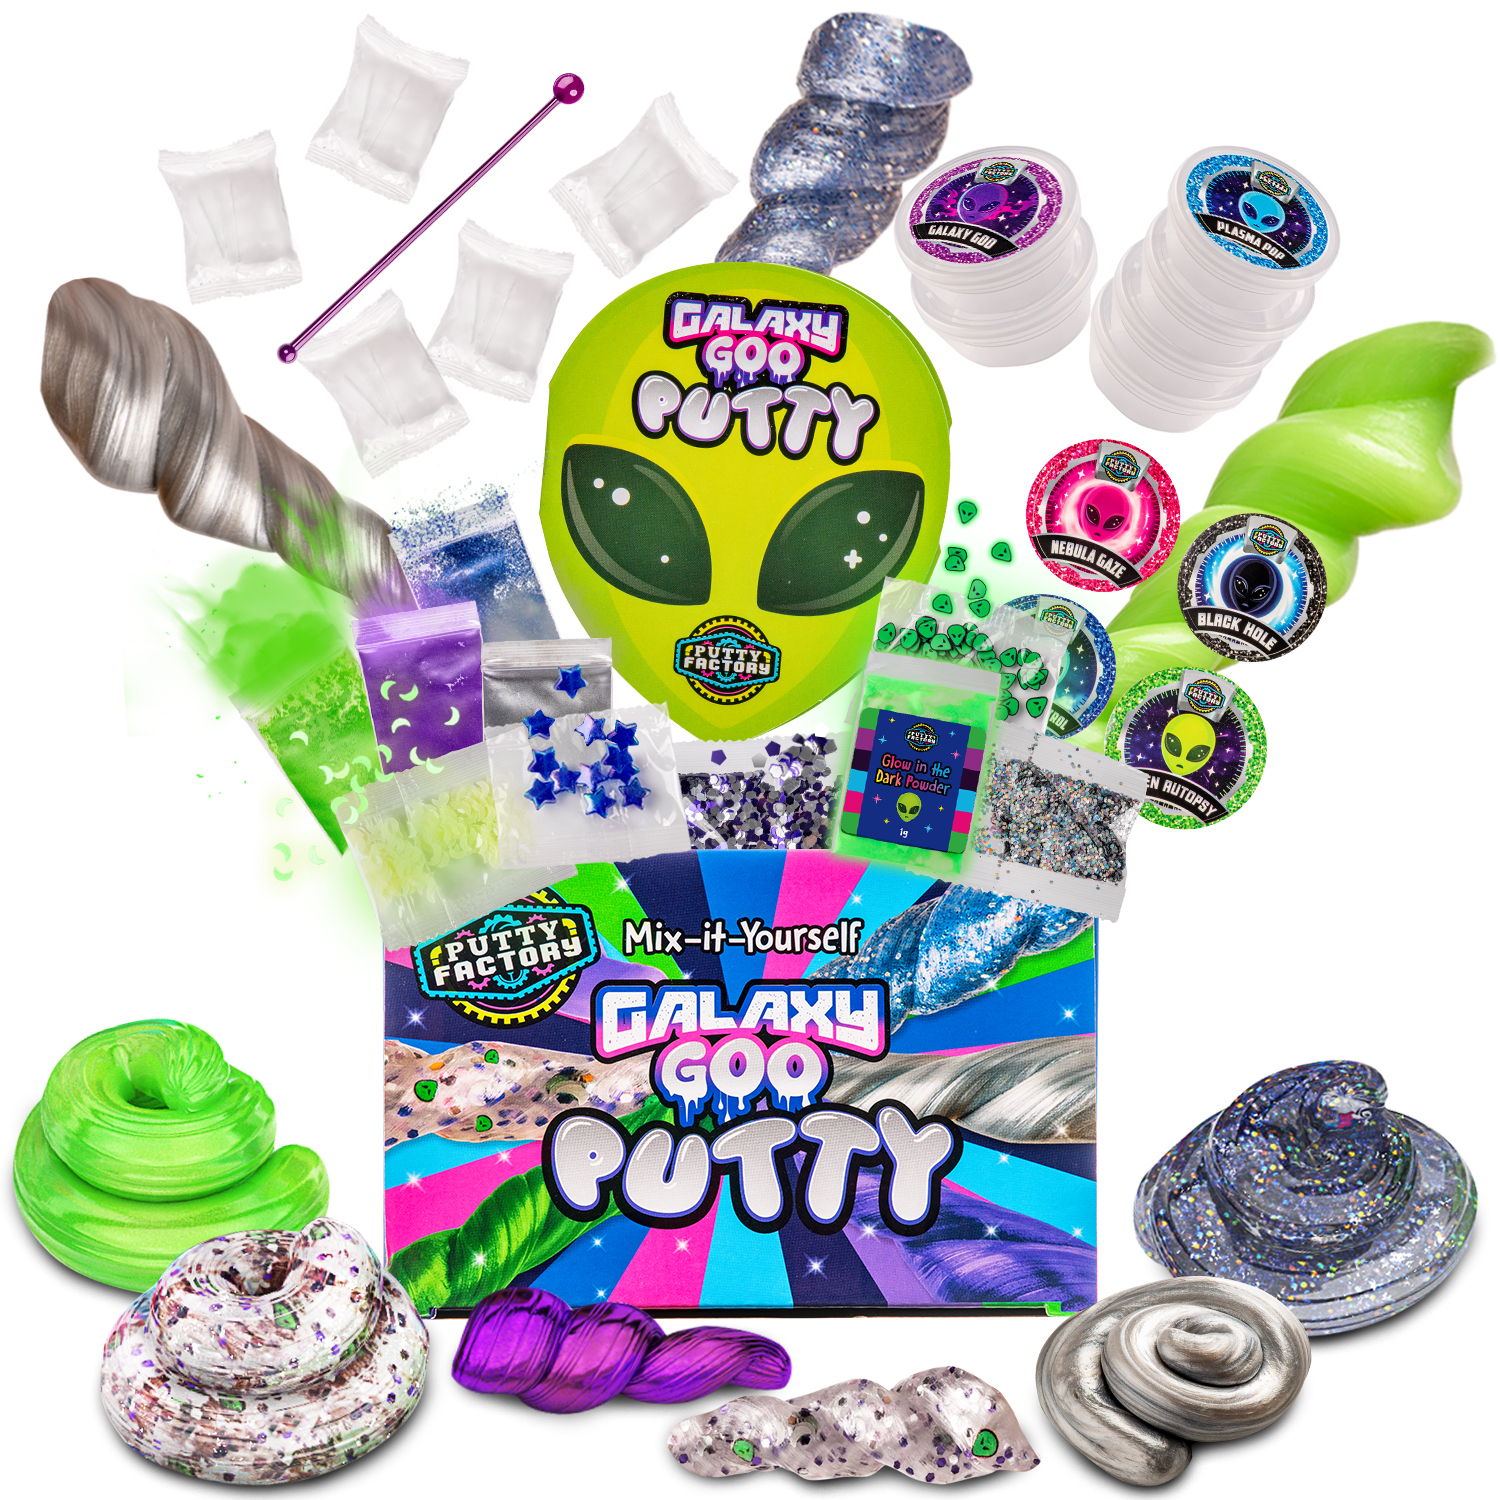 Original Stationery Galaxy Space Goo, Glow in The Dark DIY Space Putty, 29  Piece Therapy Putty with Glow in The Dark Goo Kit, Kids Stress Relief Putty  : Health & Household 